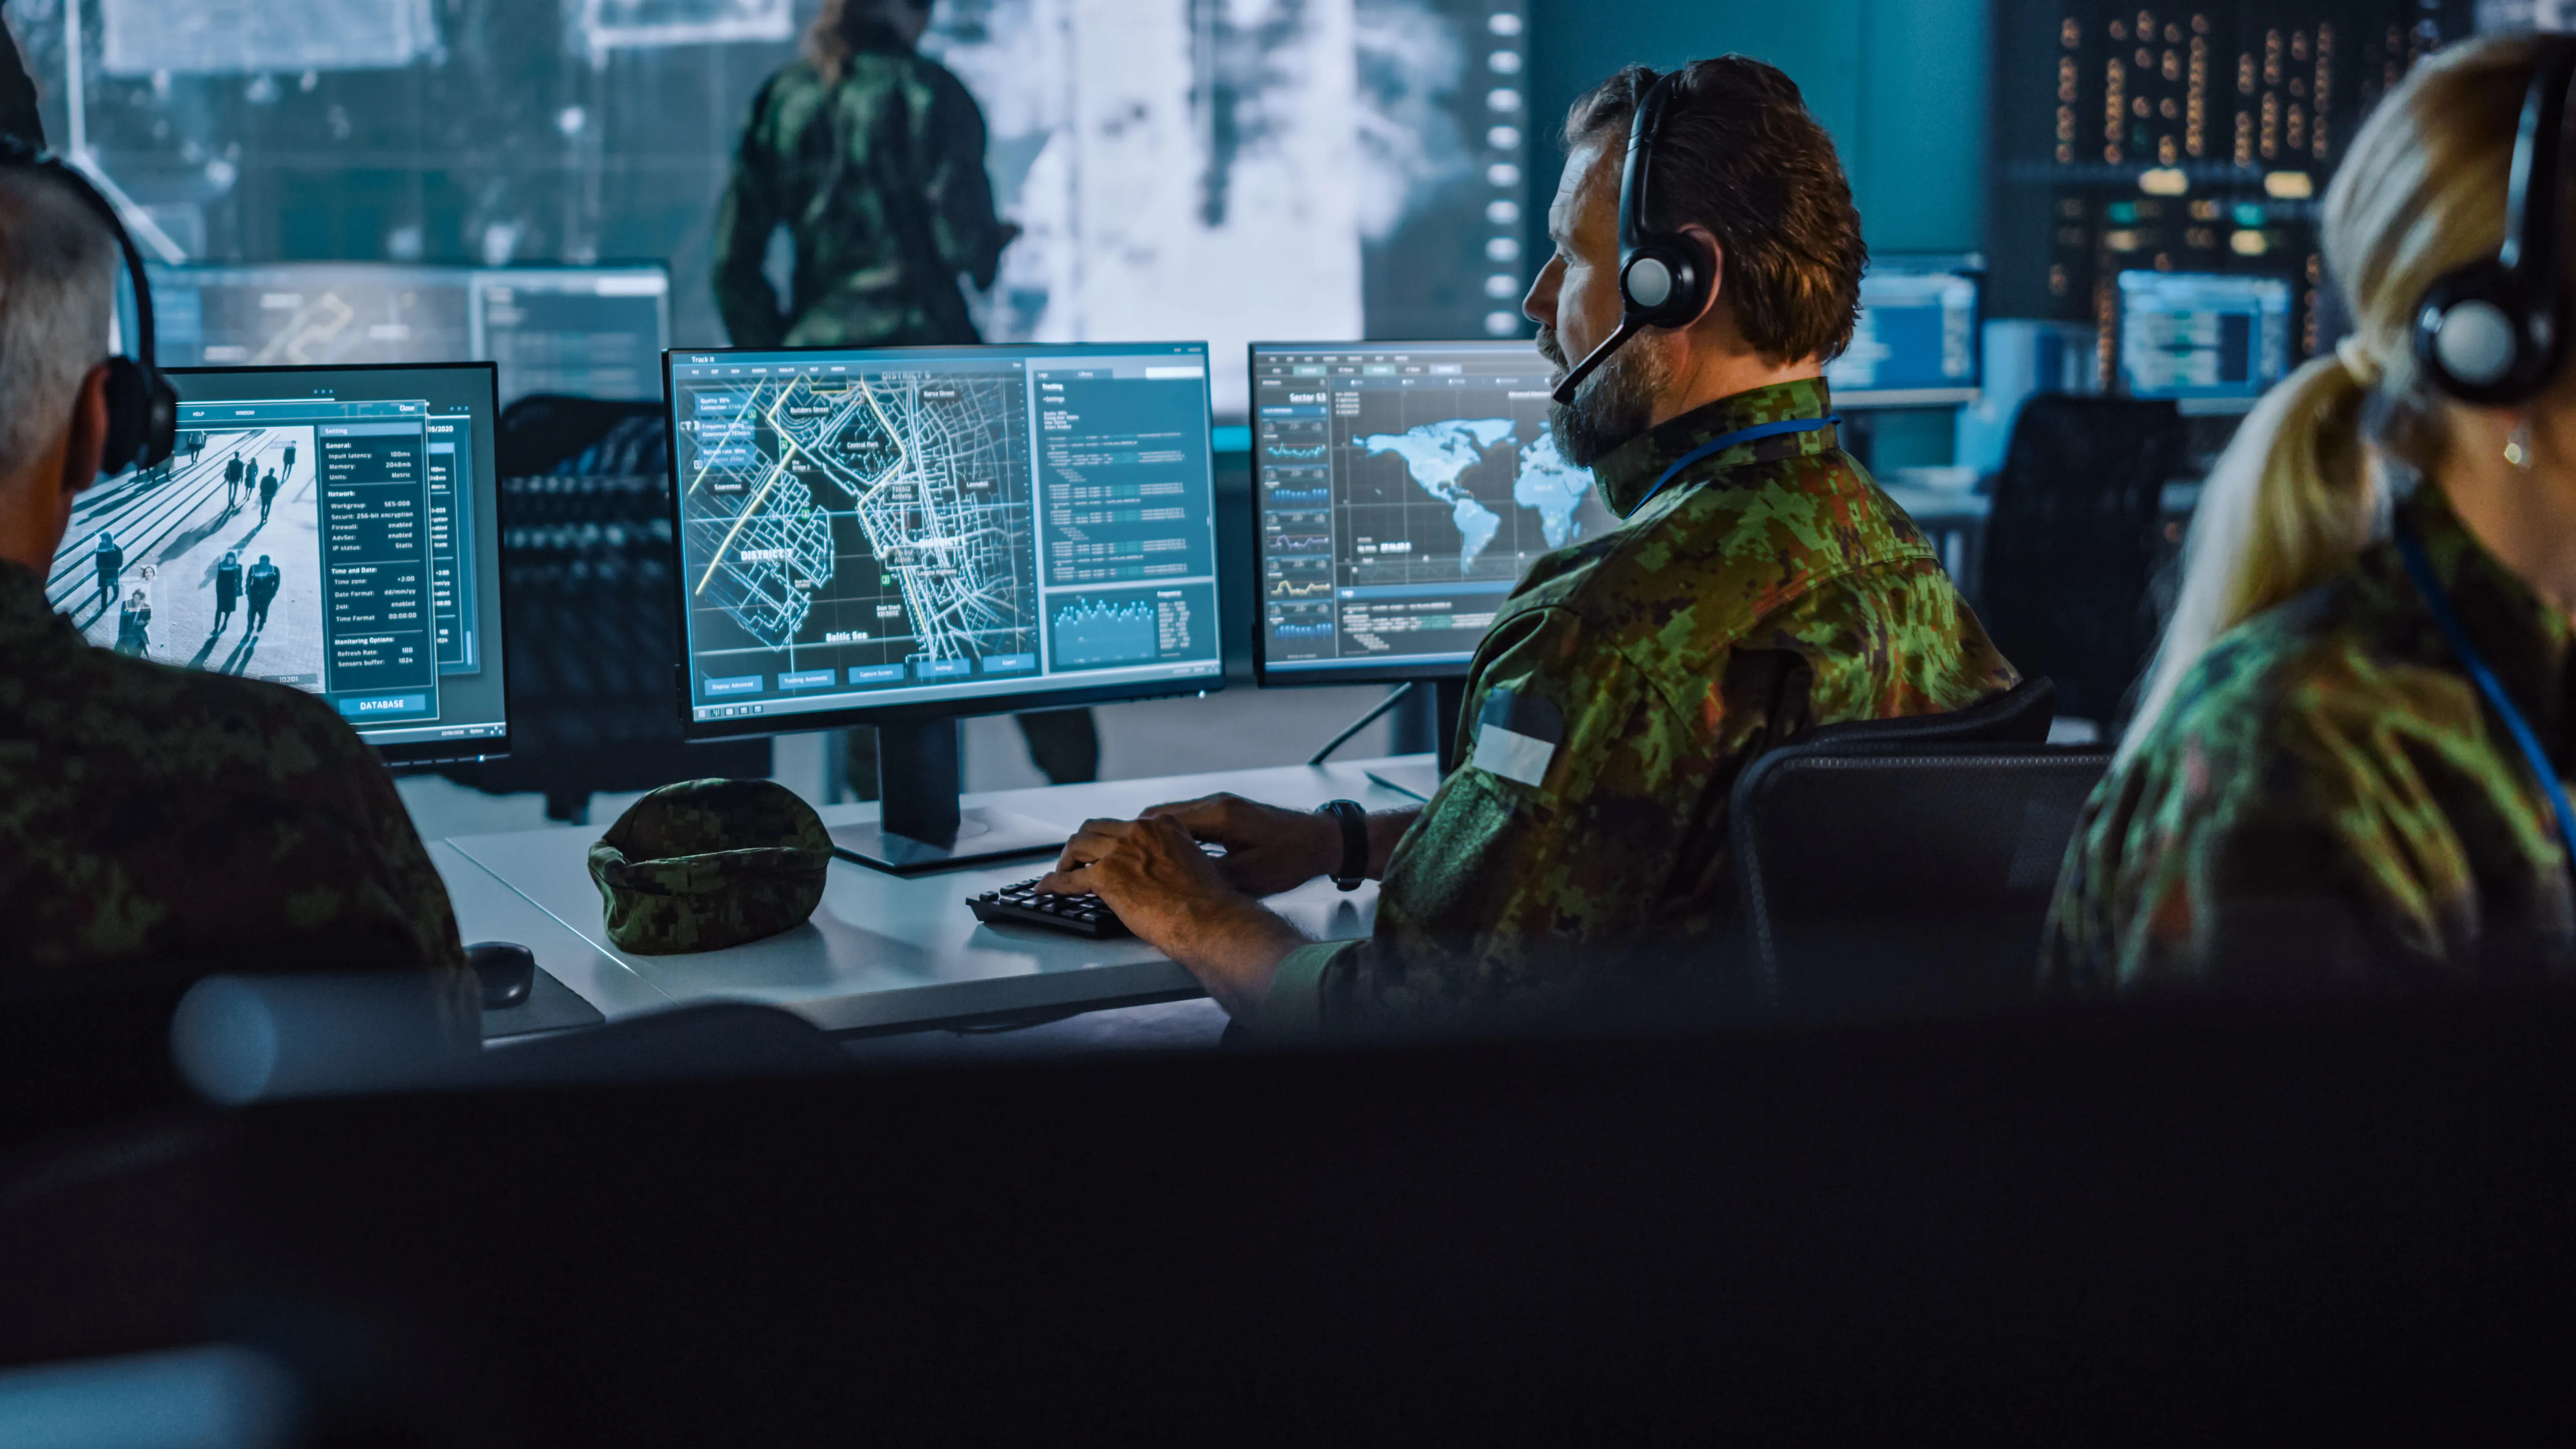 Image of defence worker in front of computer screens